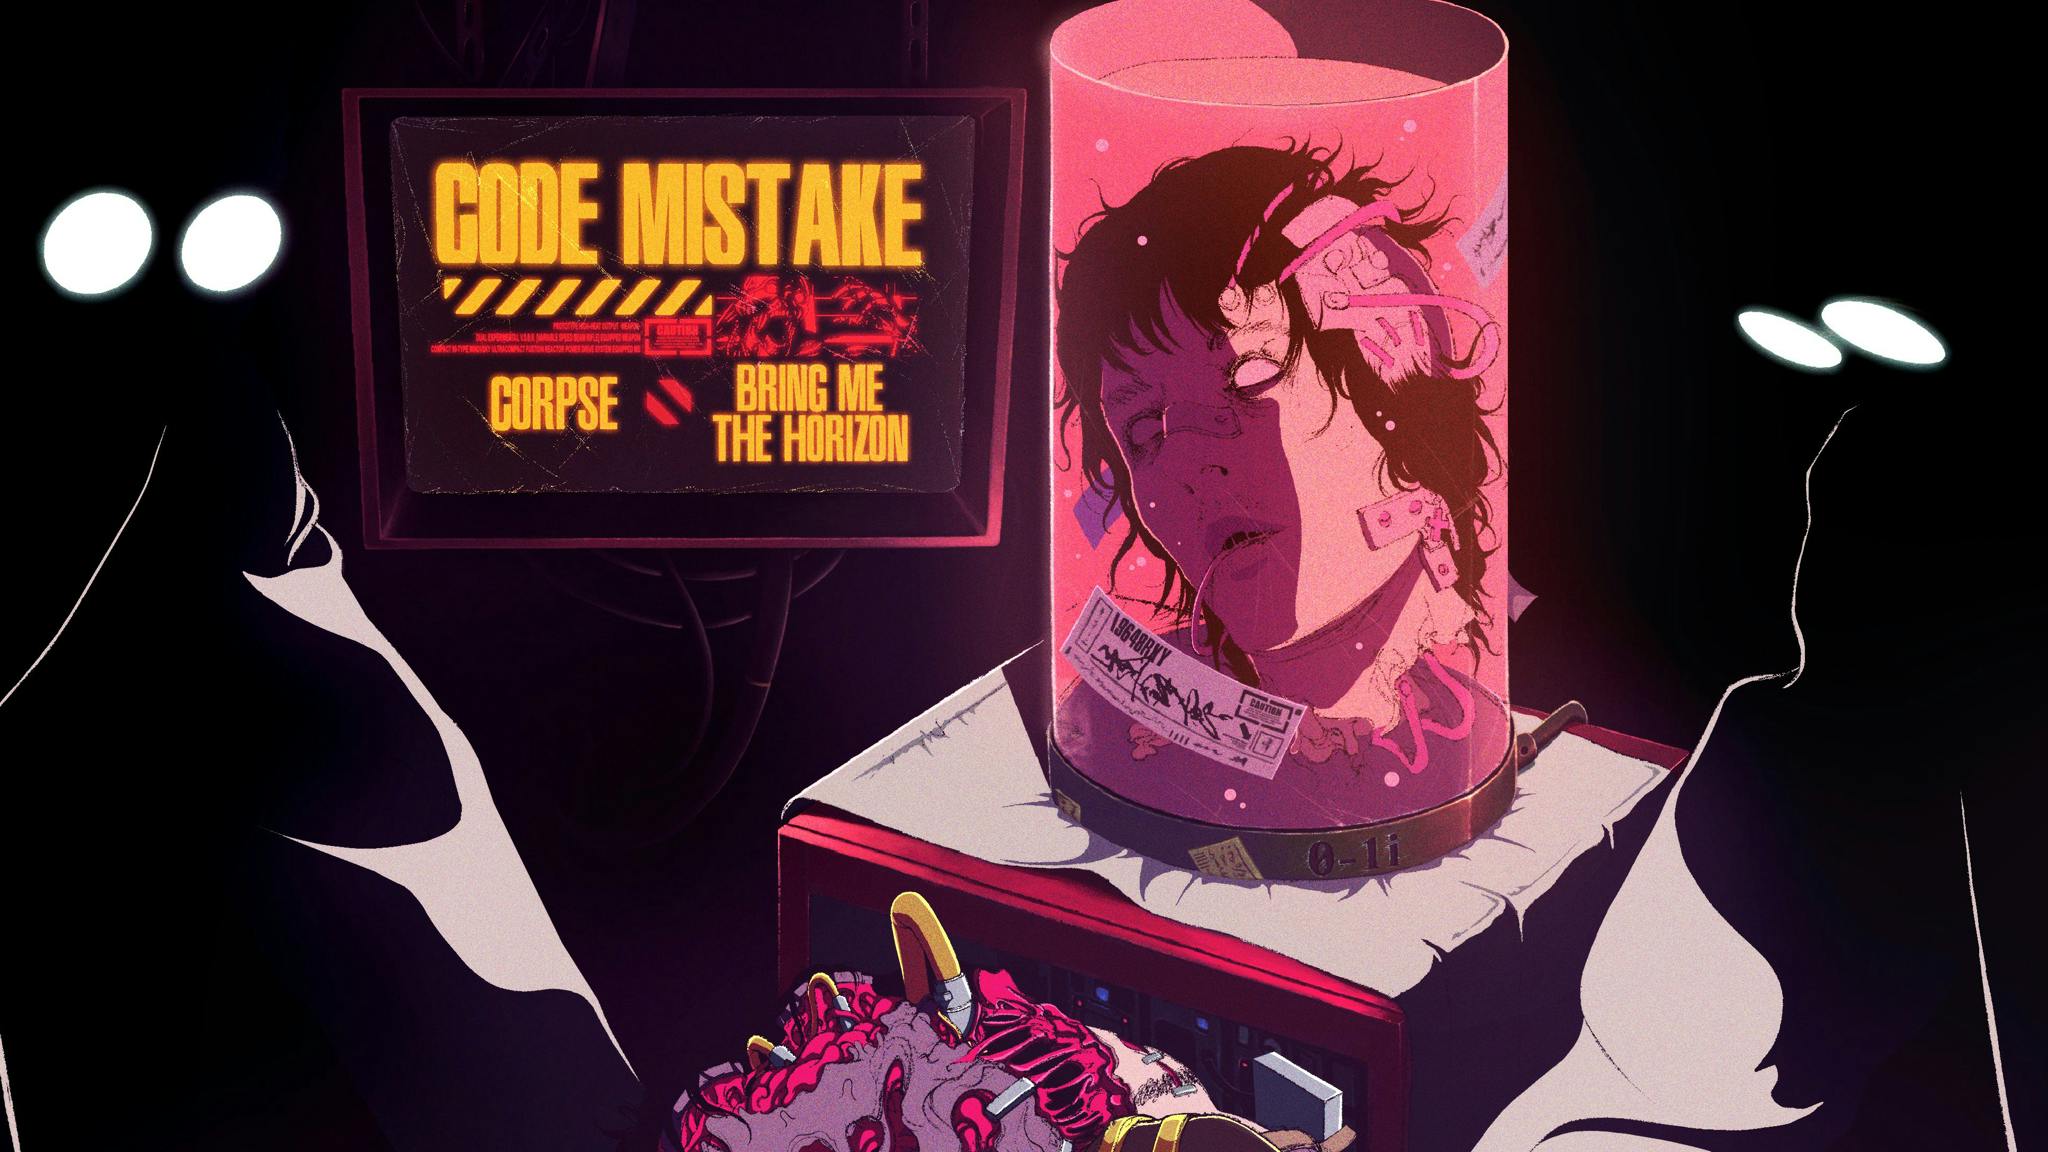 CORPSE and Bring Me The Horizon team up for crushing new single, CODE MISTAKE